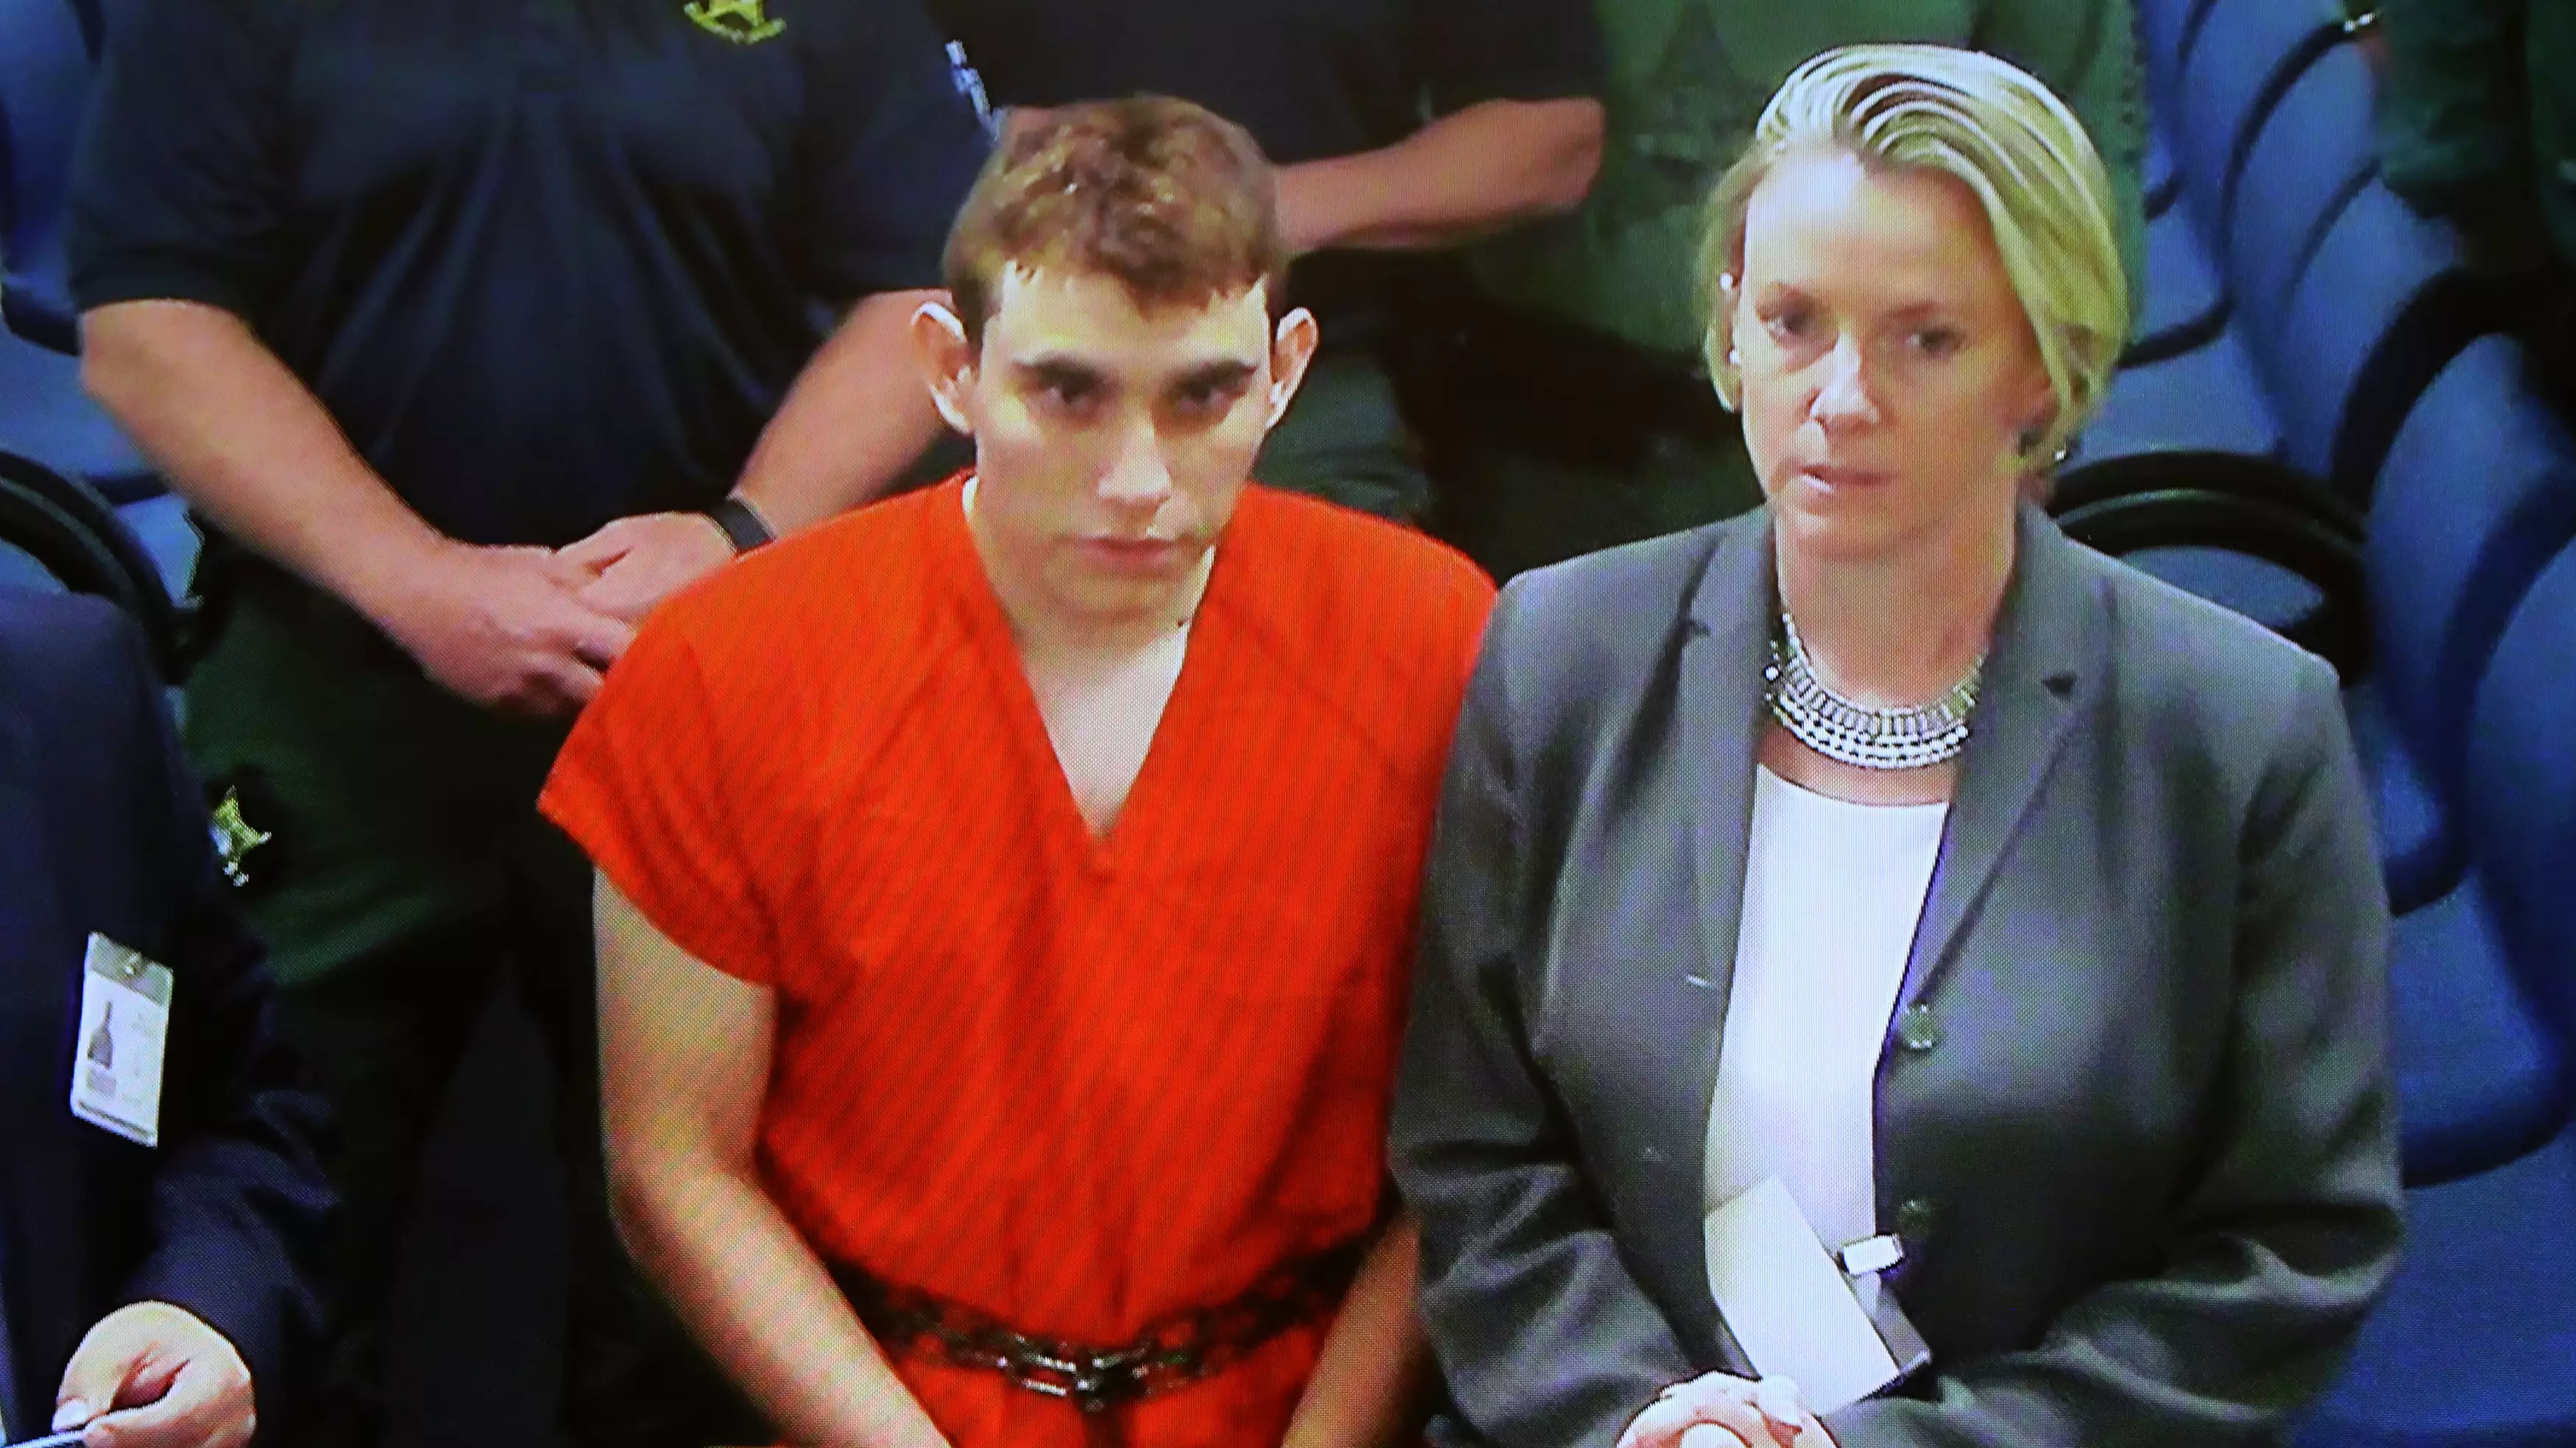 Florida School Shooting Suspect Could Face The Death Penalty 